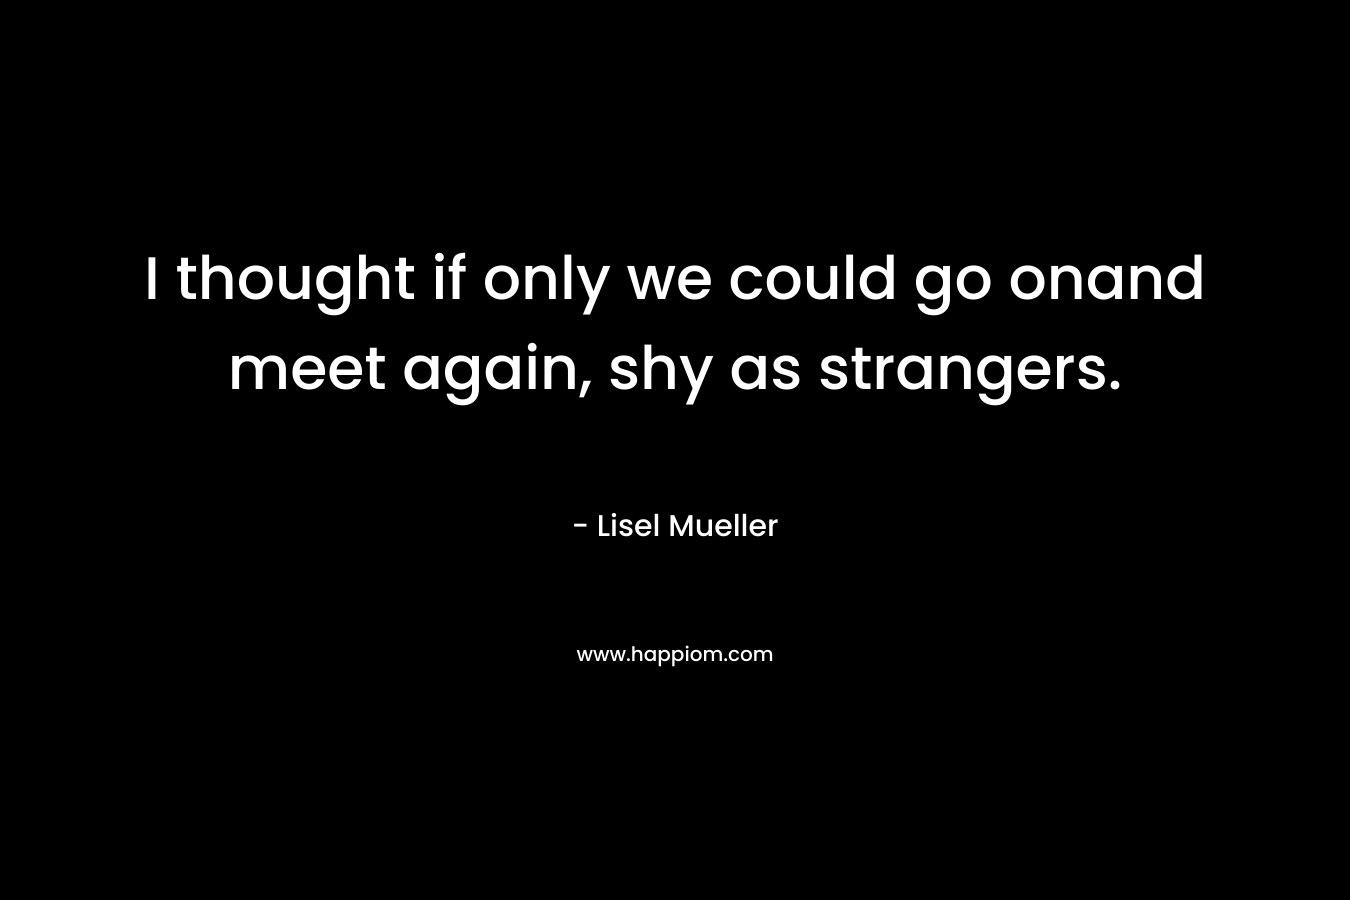 I thought if only we could go onand meet again, shy as strangers. – Lisel Mueller